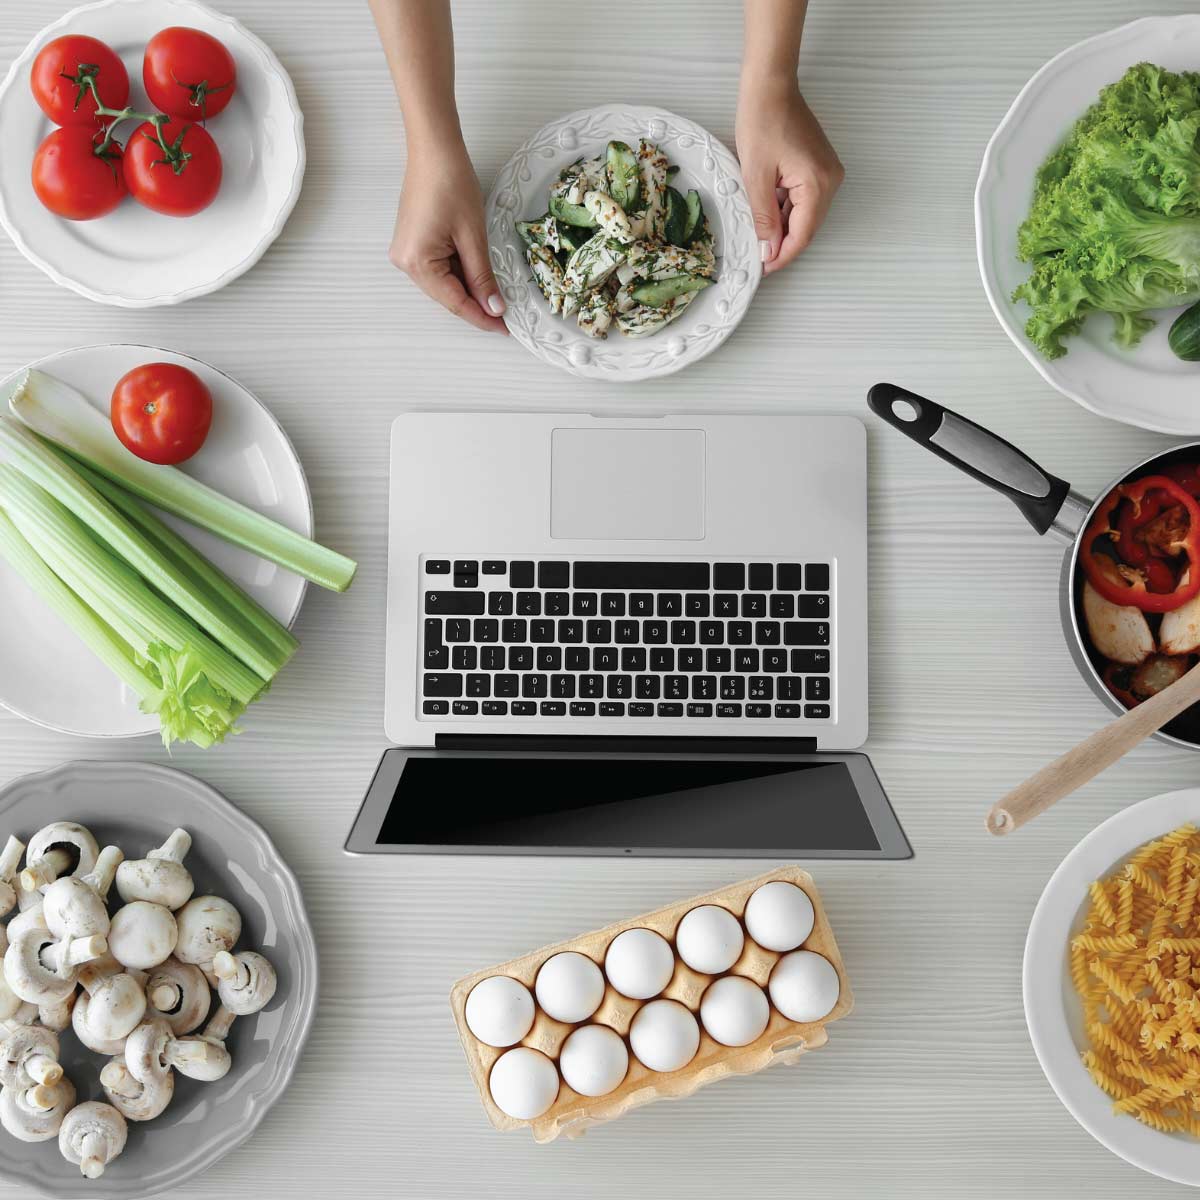 Laptop open on a counter with various bowls and dishes of food spread around it.